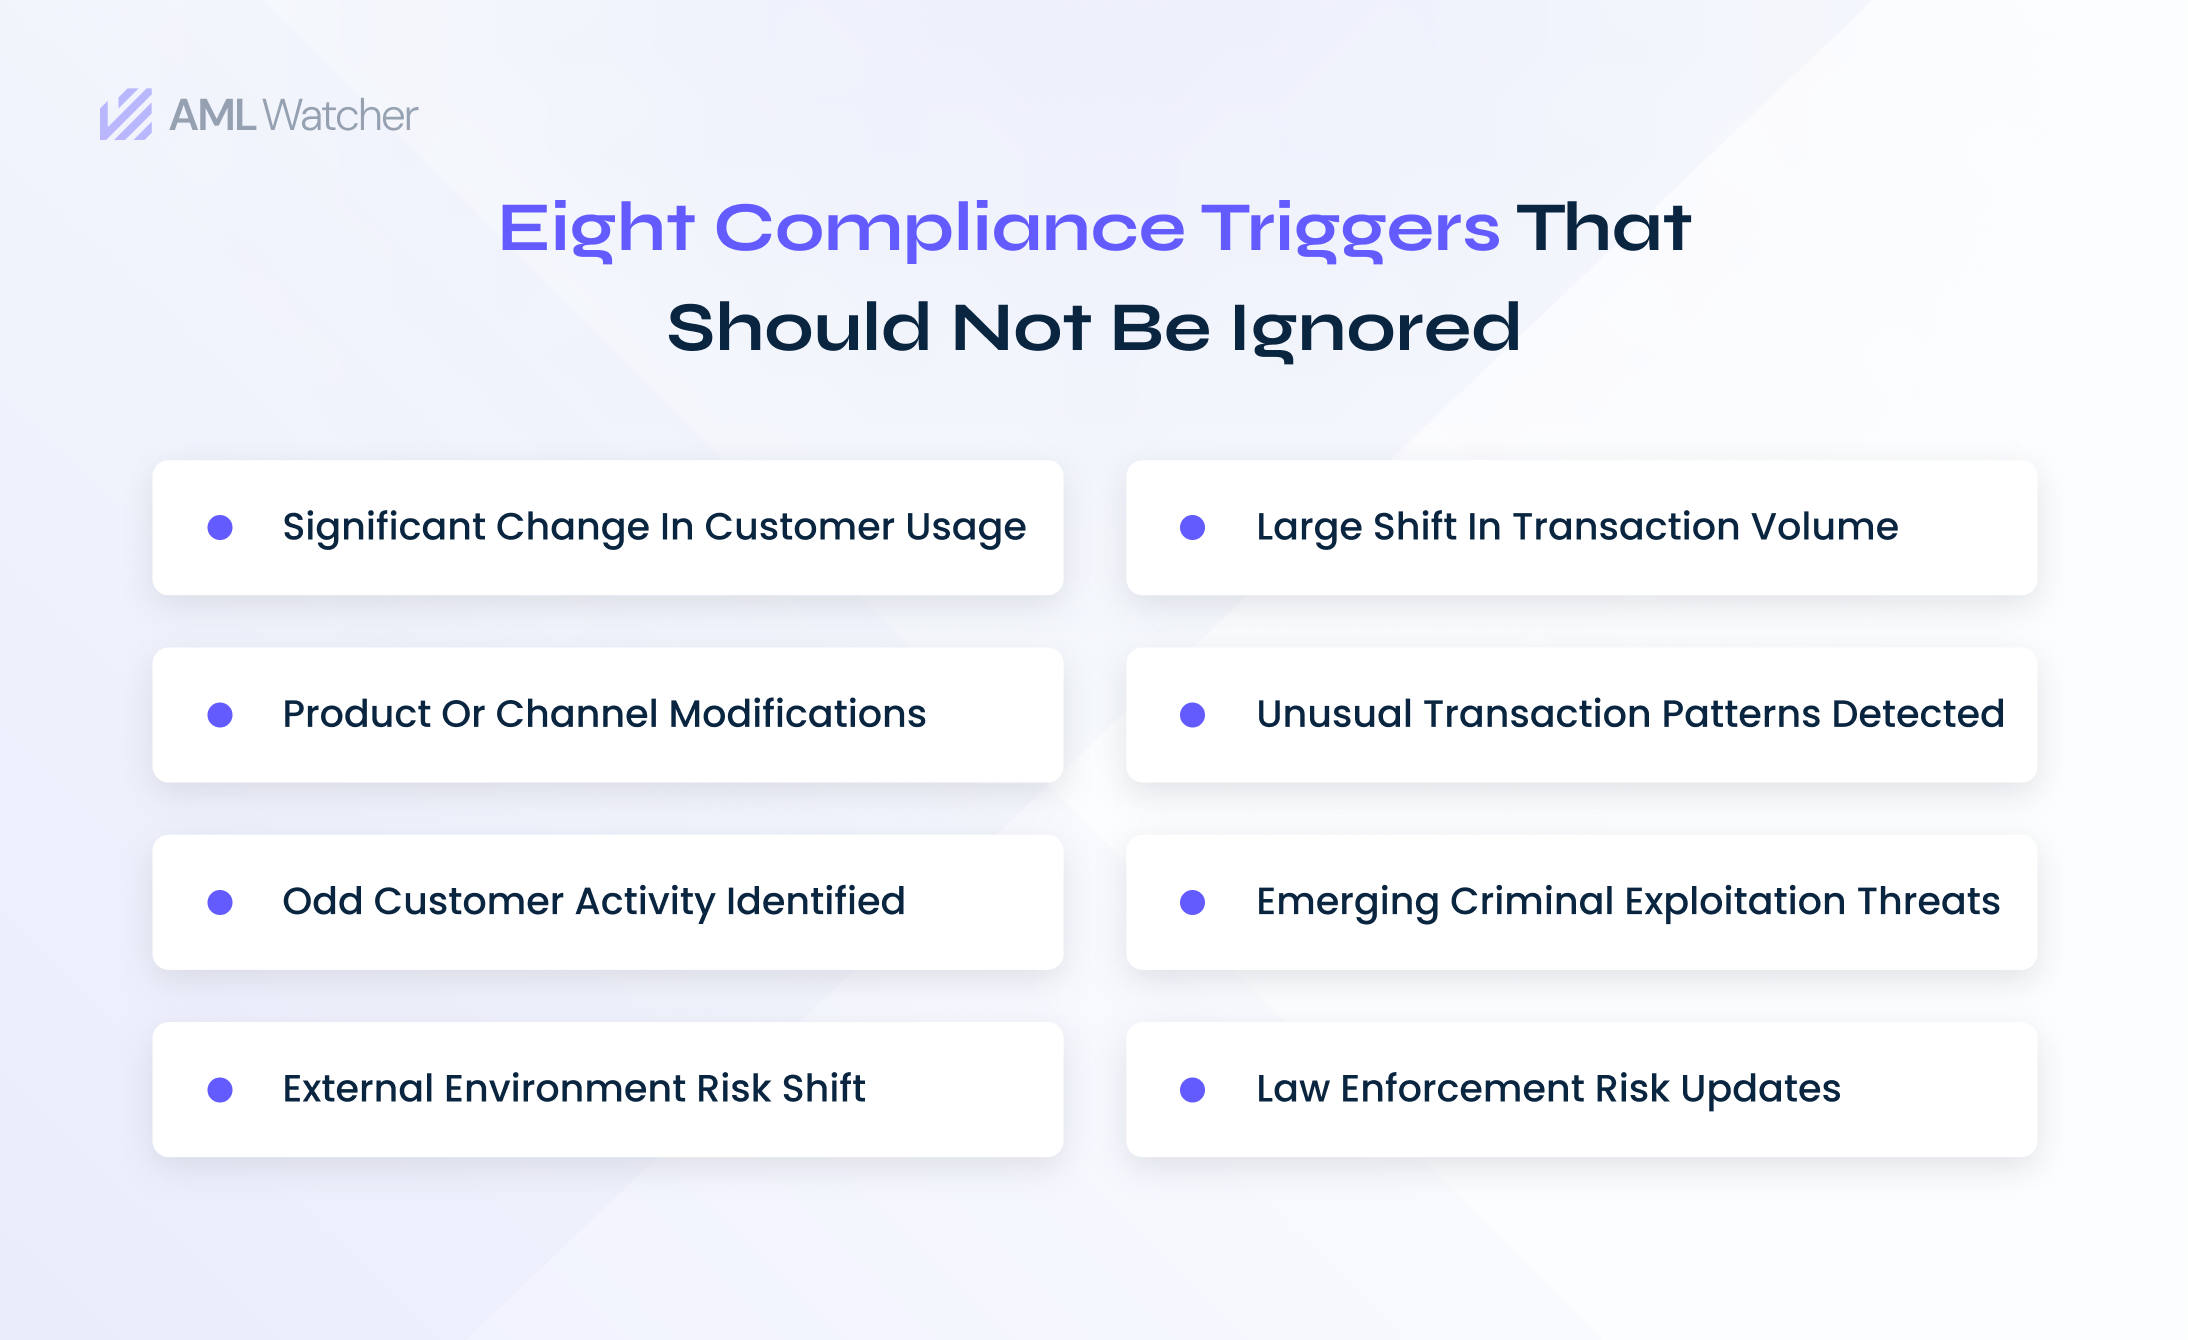 the featured image shows eight significant triggers that should enable businesses to reevaluate their AML/CFT risk assessment and consequently control measures.